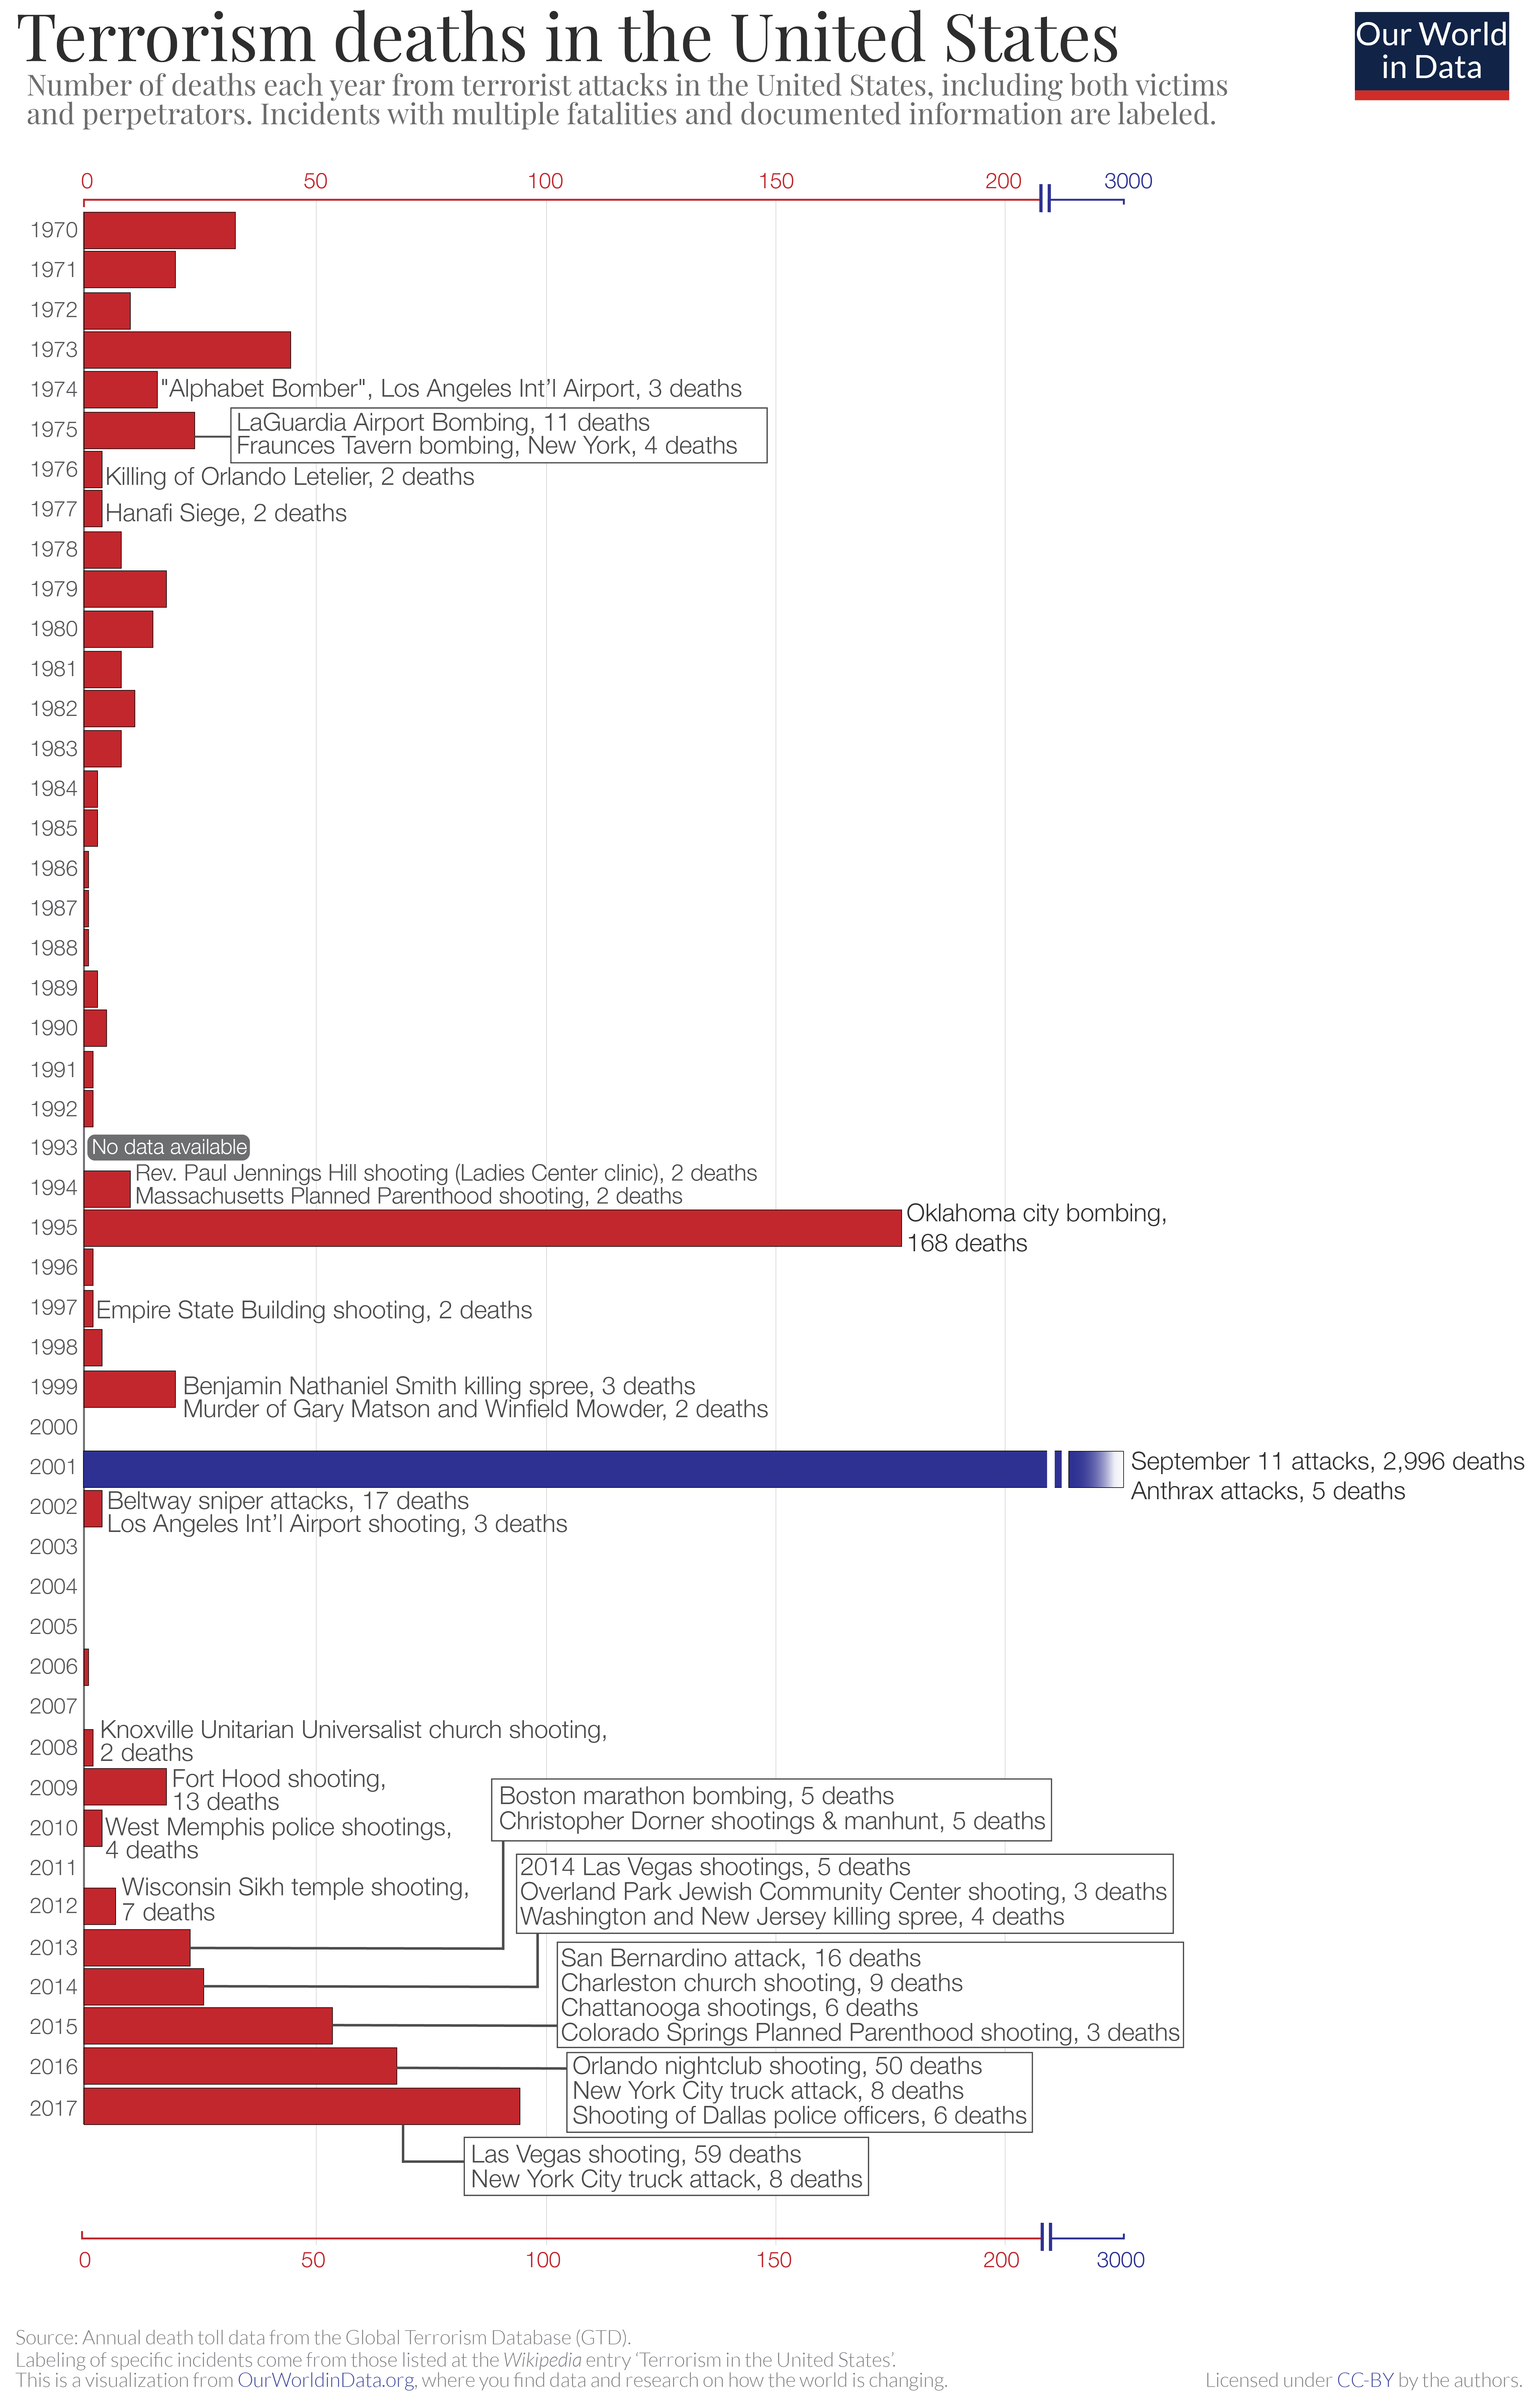 Terrorism deaths in the usa